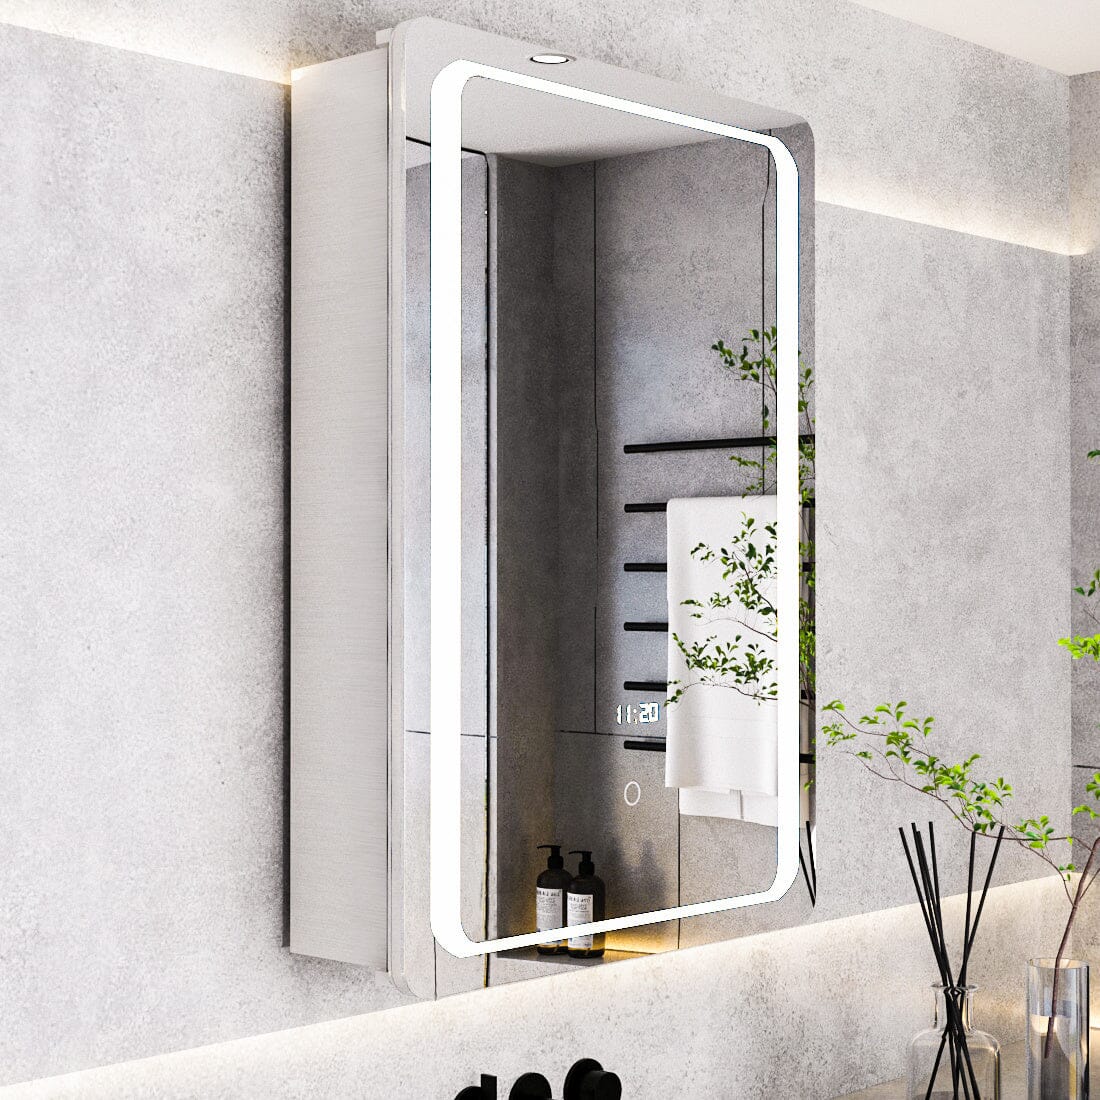 27inch X 20inch LED Illuminated Mirror Cabinet with Sensor Switch Bathroom Mirror Cabinets Living and Home 